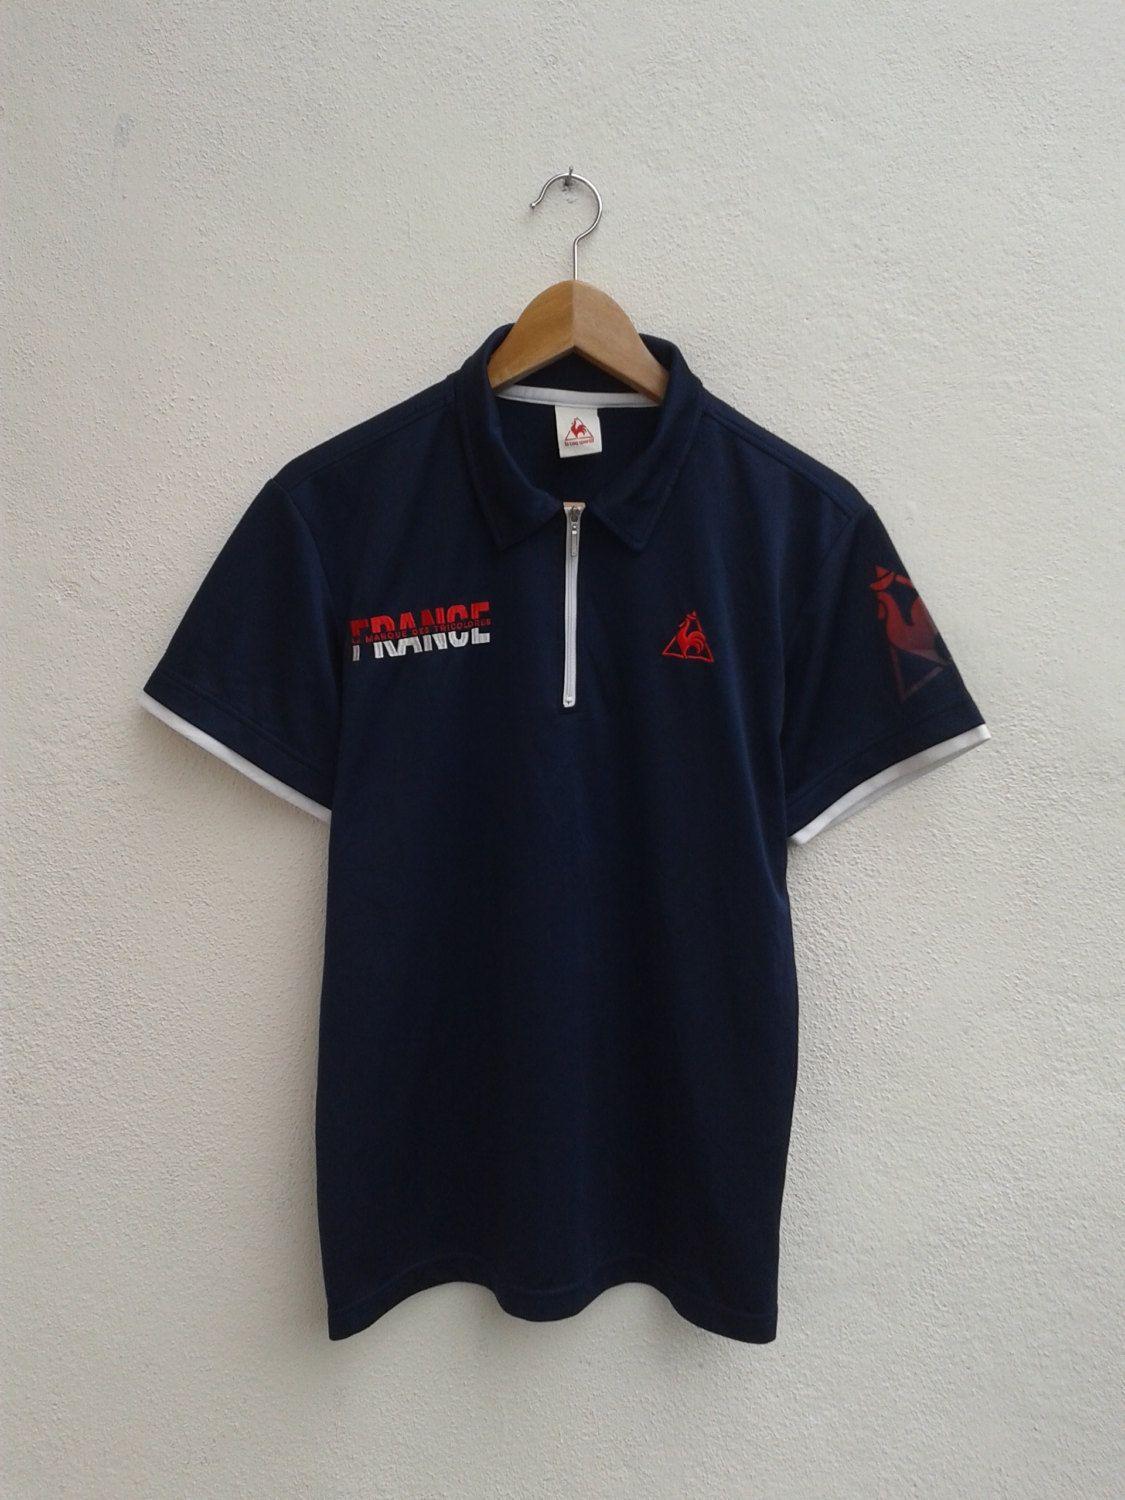 Rooster in Triangle Logo - Vintage 90s Le Coq Sportif Embroidered France Polos Zip Rooster ...